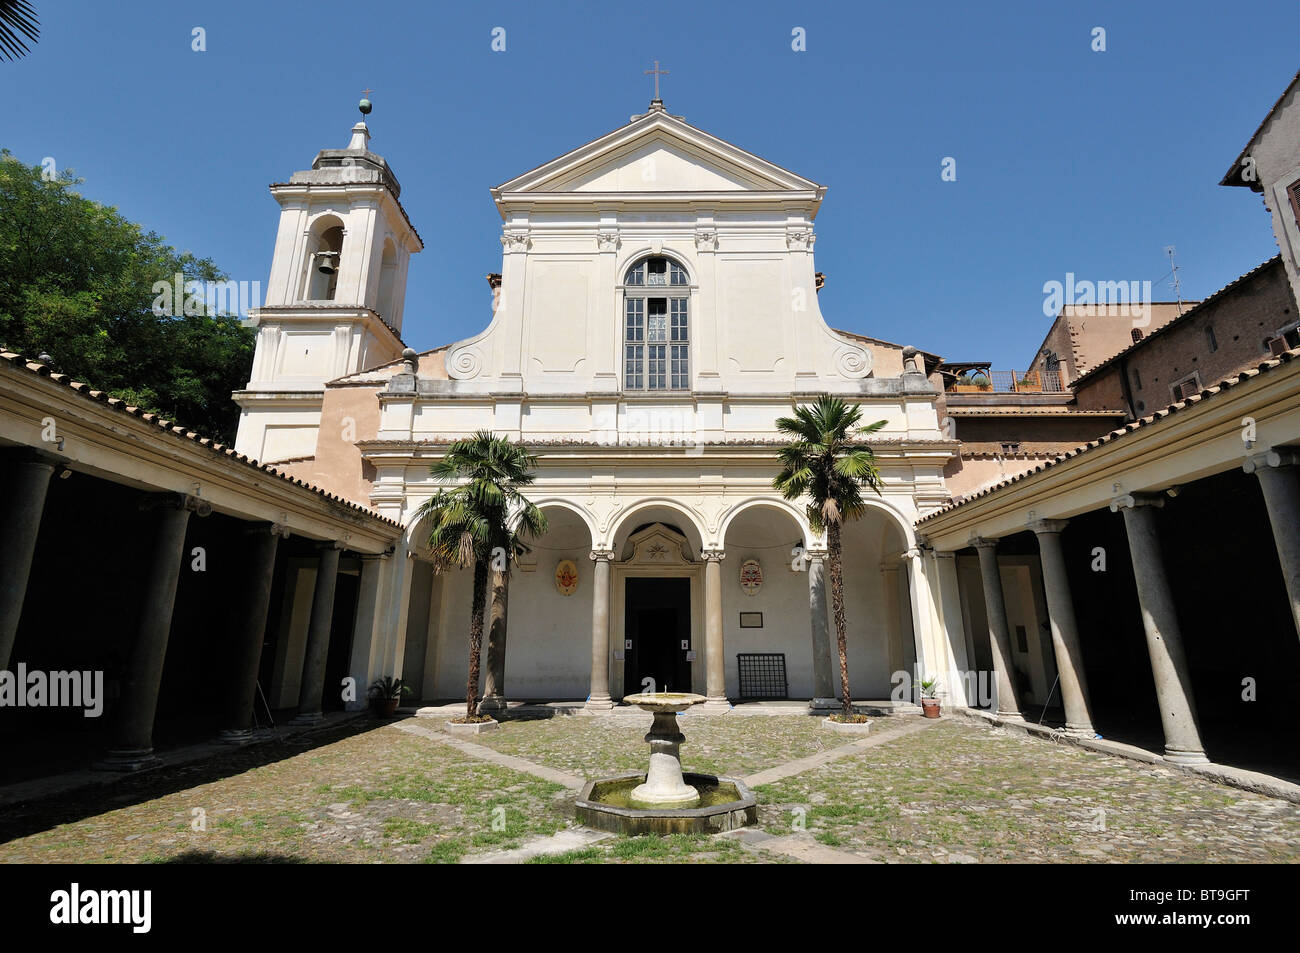 Rome. Italy. 12th C church of San Clemente. Stock Photo